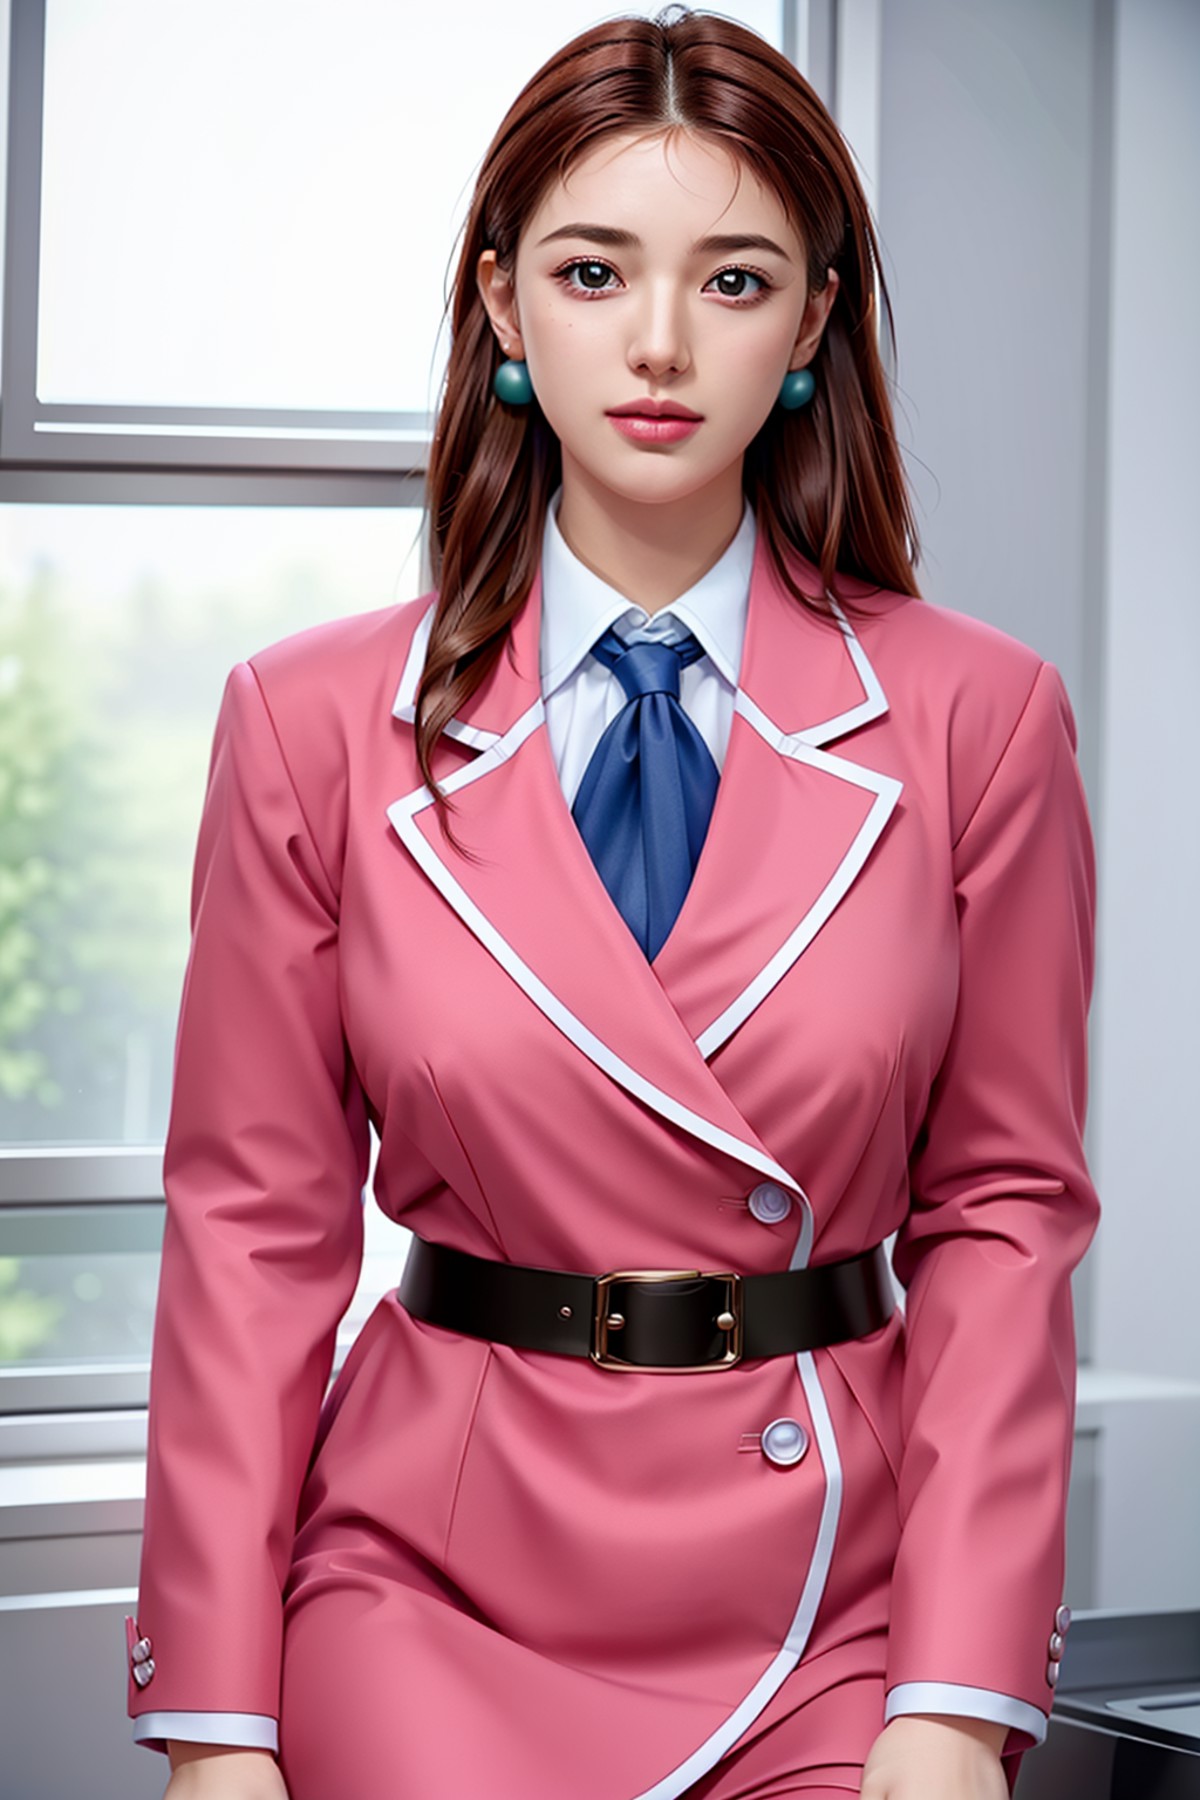 (day),school,classroom, windows,
dynamic pose, standing at attention,
pink pencil skirt, pink jacket,collared shirt, white...